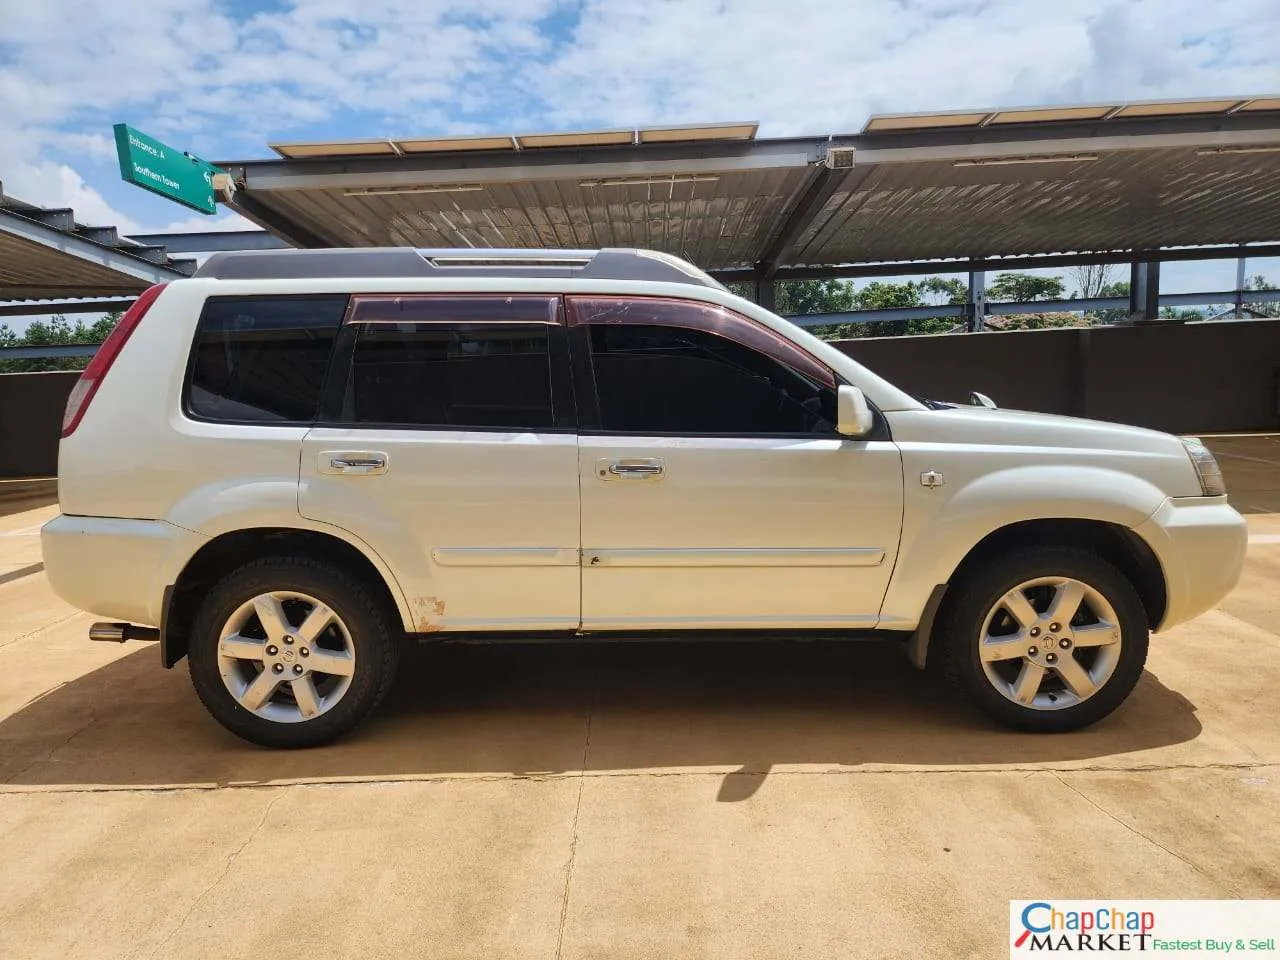 Cars Cars For Sale/Vehicles-Nissan XTRAIL NT-30 You Pay 20% Deposit Trade in Ok Wow! 9